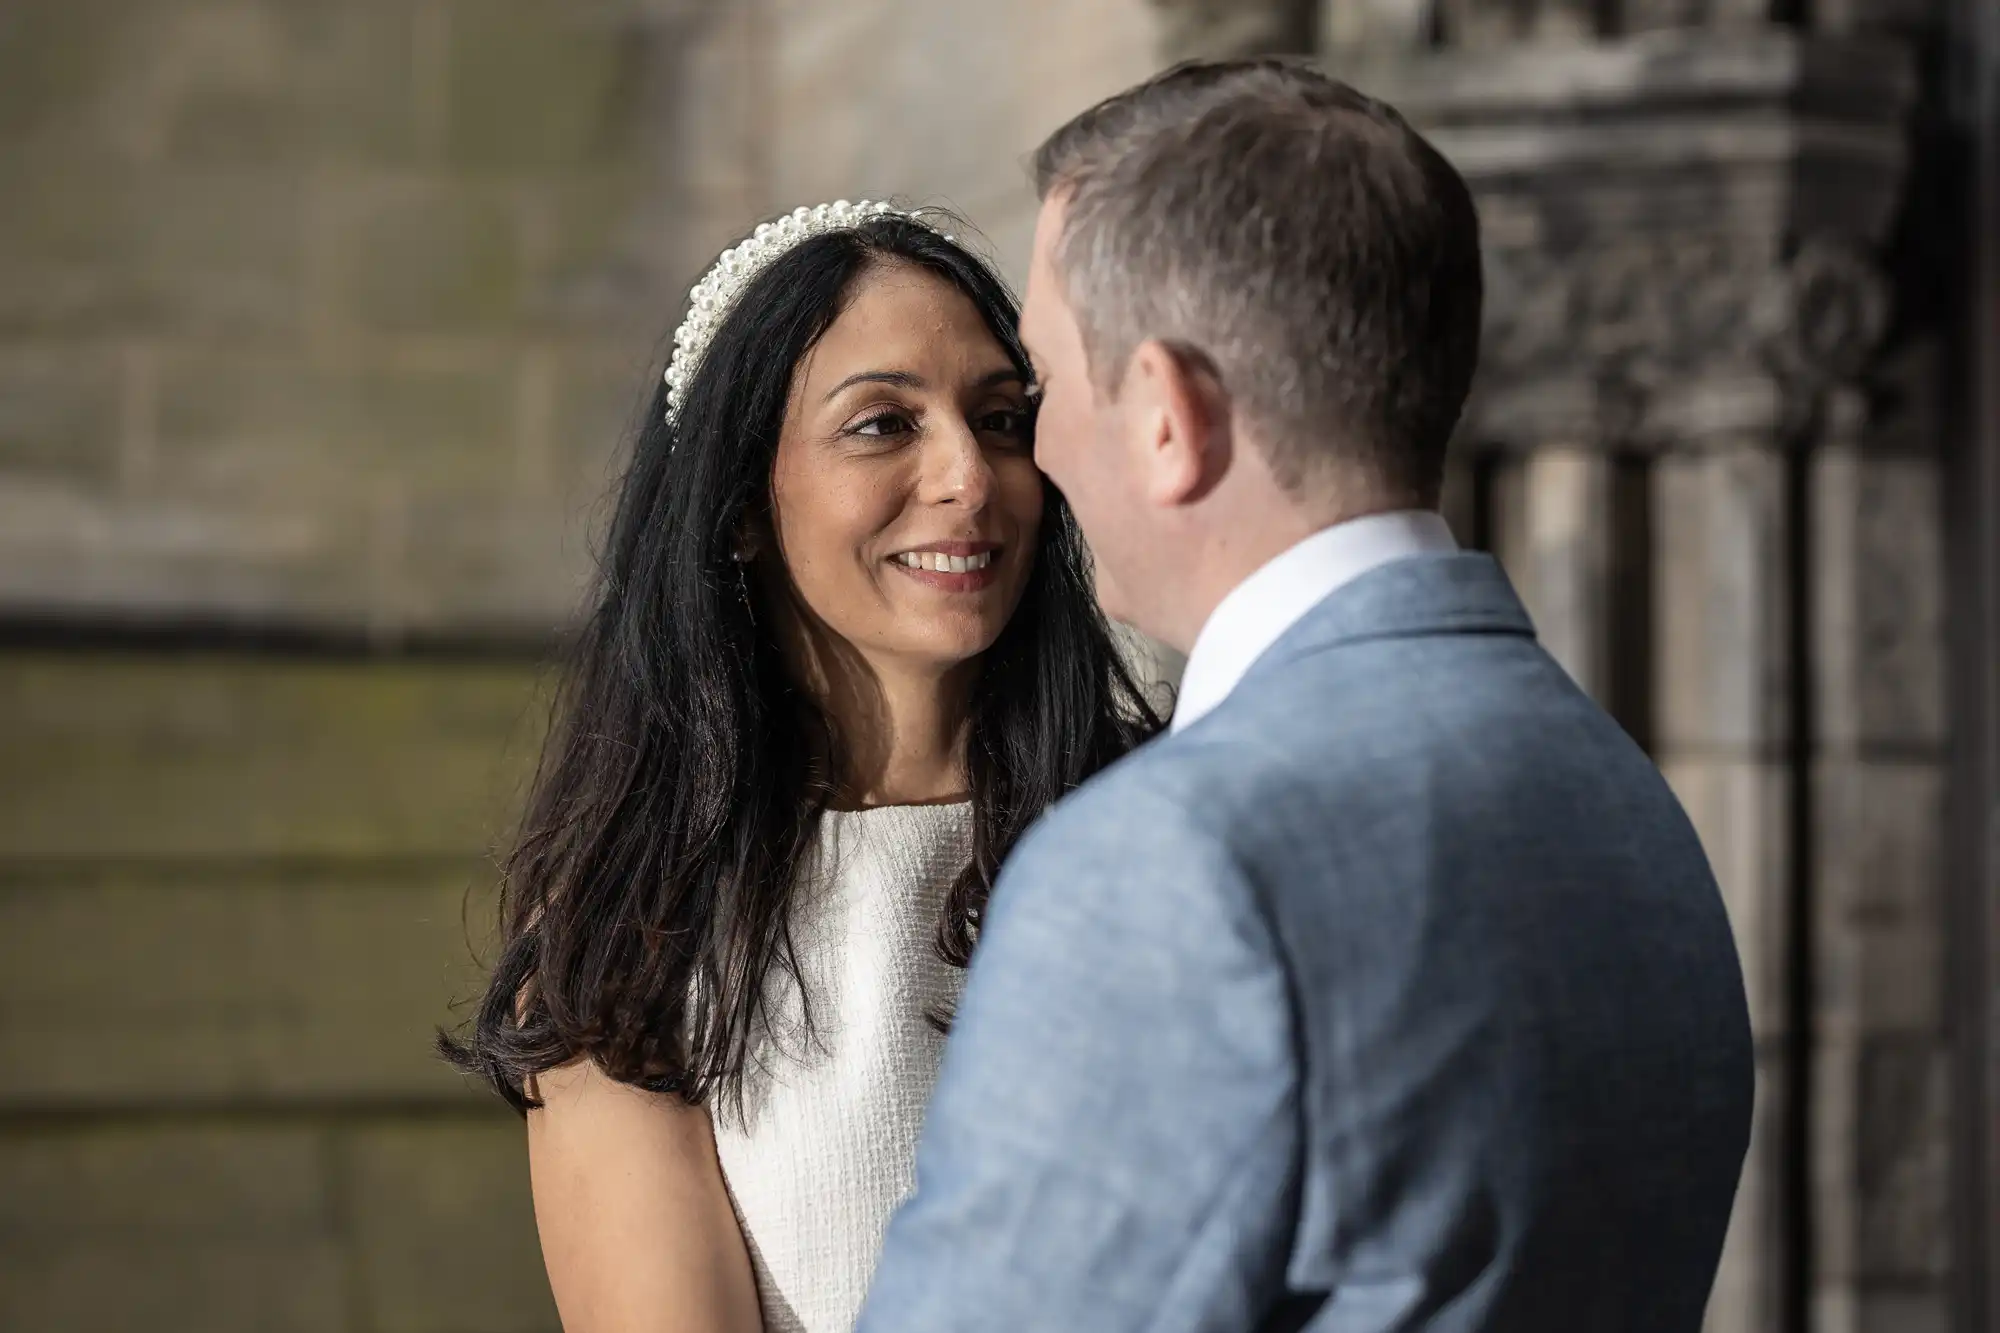 A woman in a white dress and a man in a light blue suit gaze at each other and smile in front of a stone building.